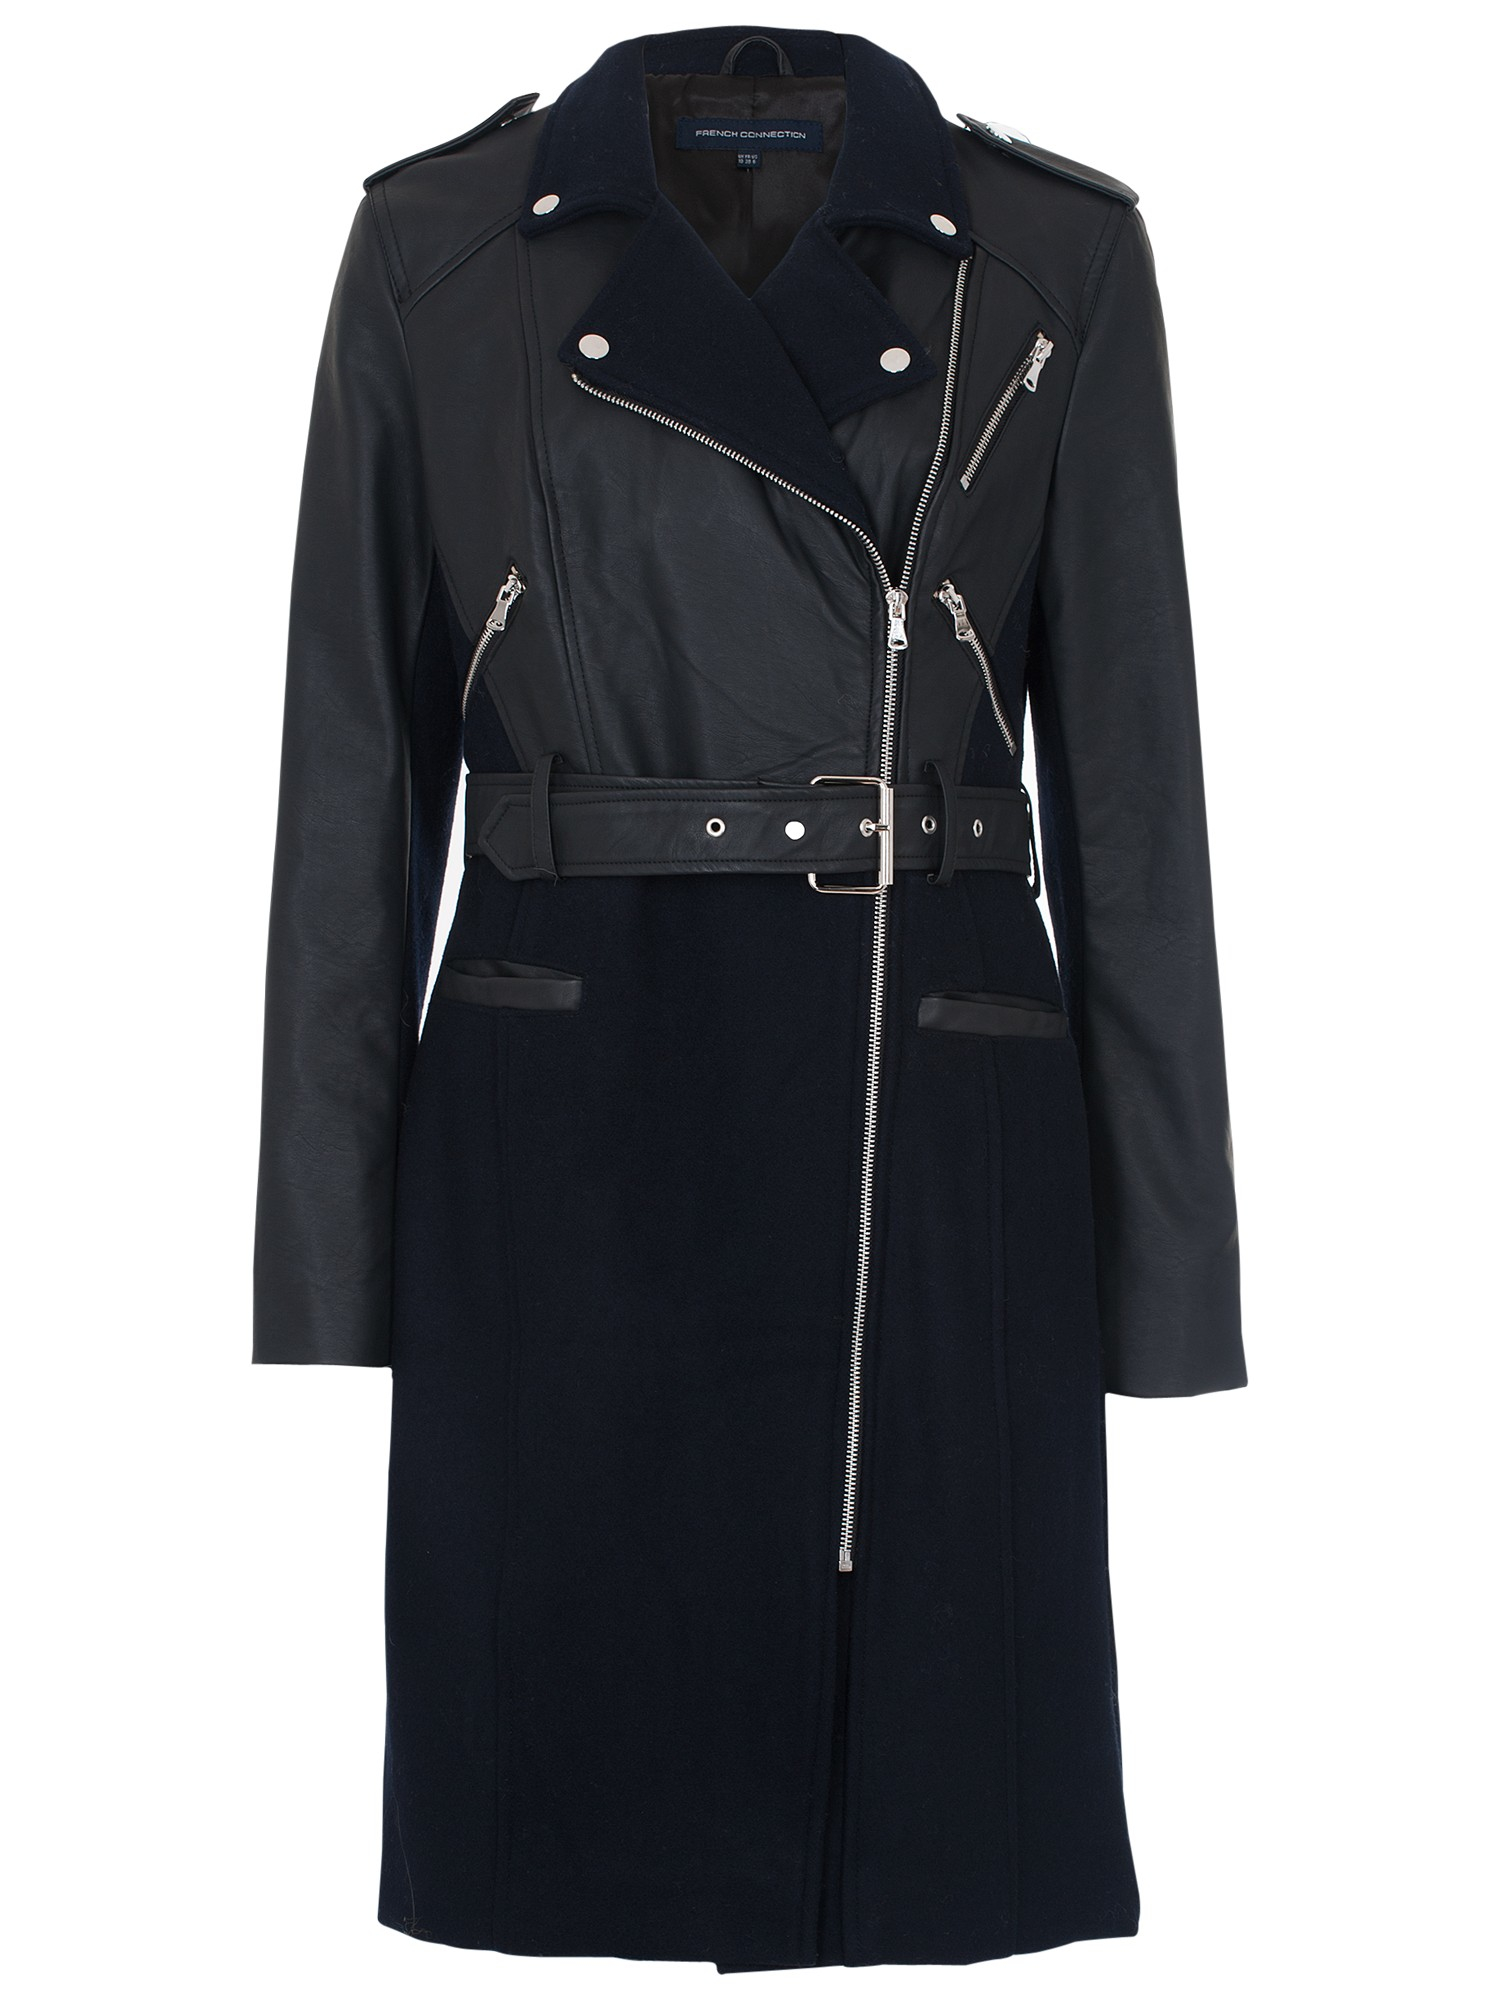 French Connection Idol Belted Trench Coat in Black - Lyst